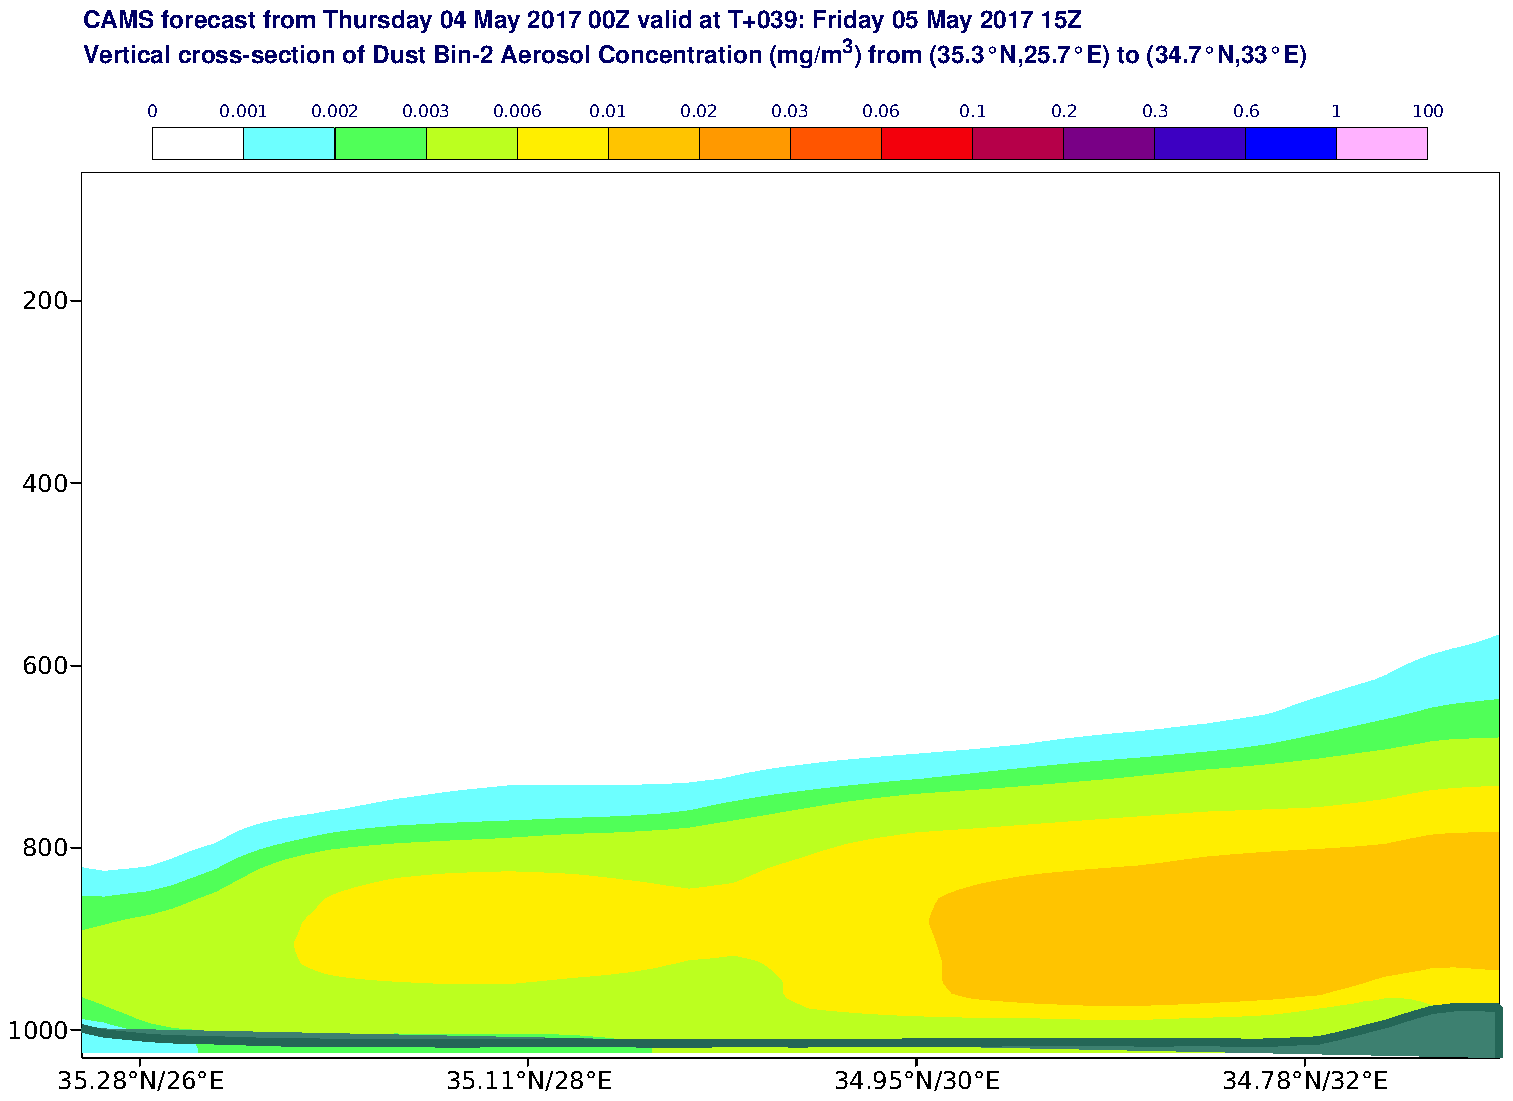 Vertical cross-section of Dust Bin-2 Aerosol Concentration (mg/m3) valid at T39 - 2017-05-05 15:00